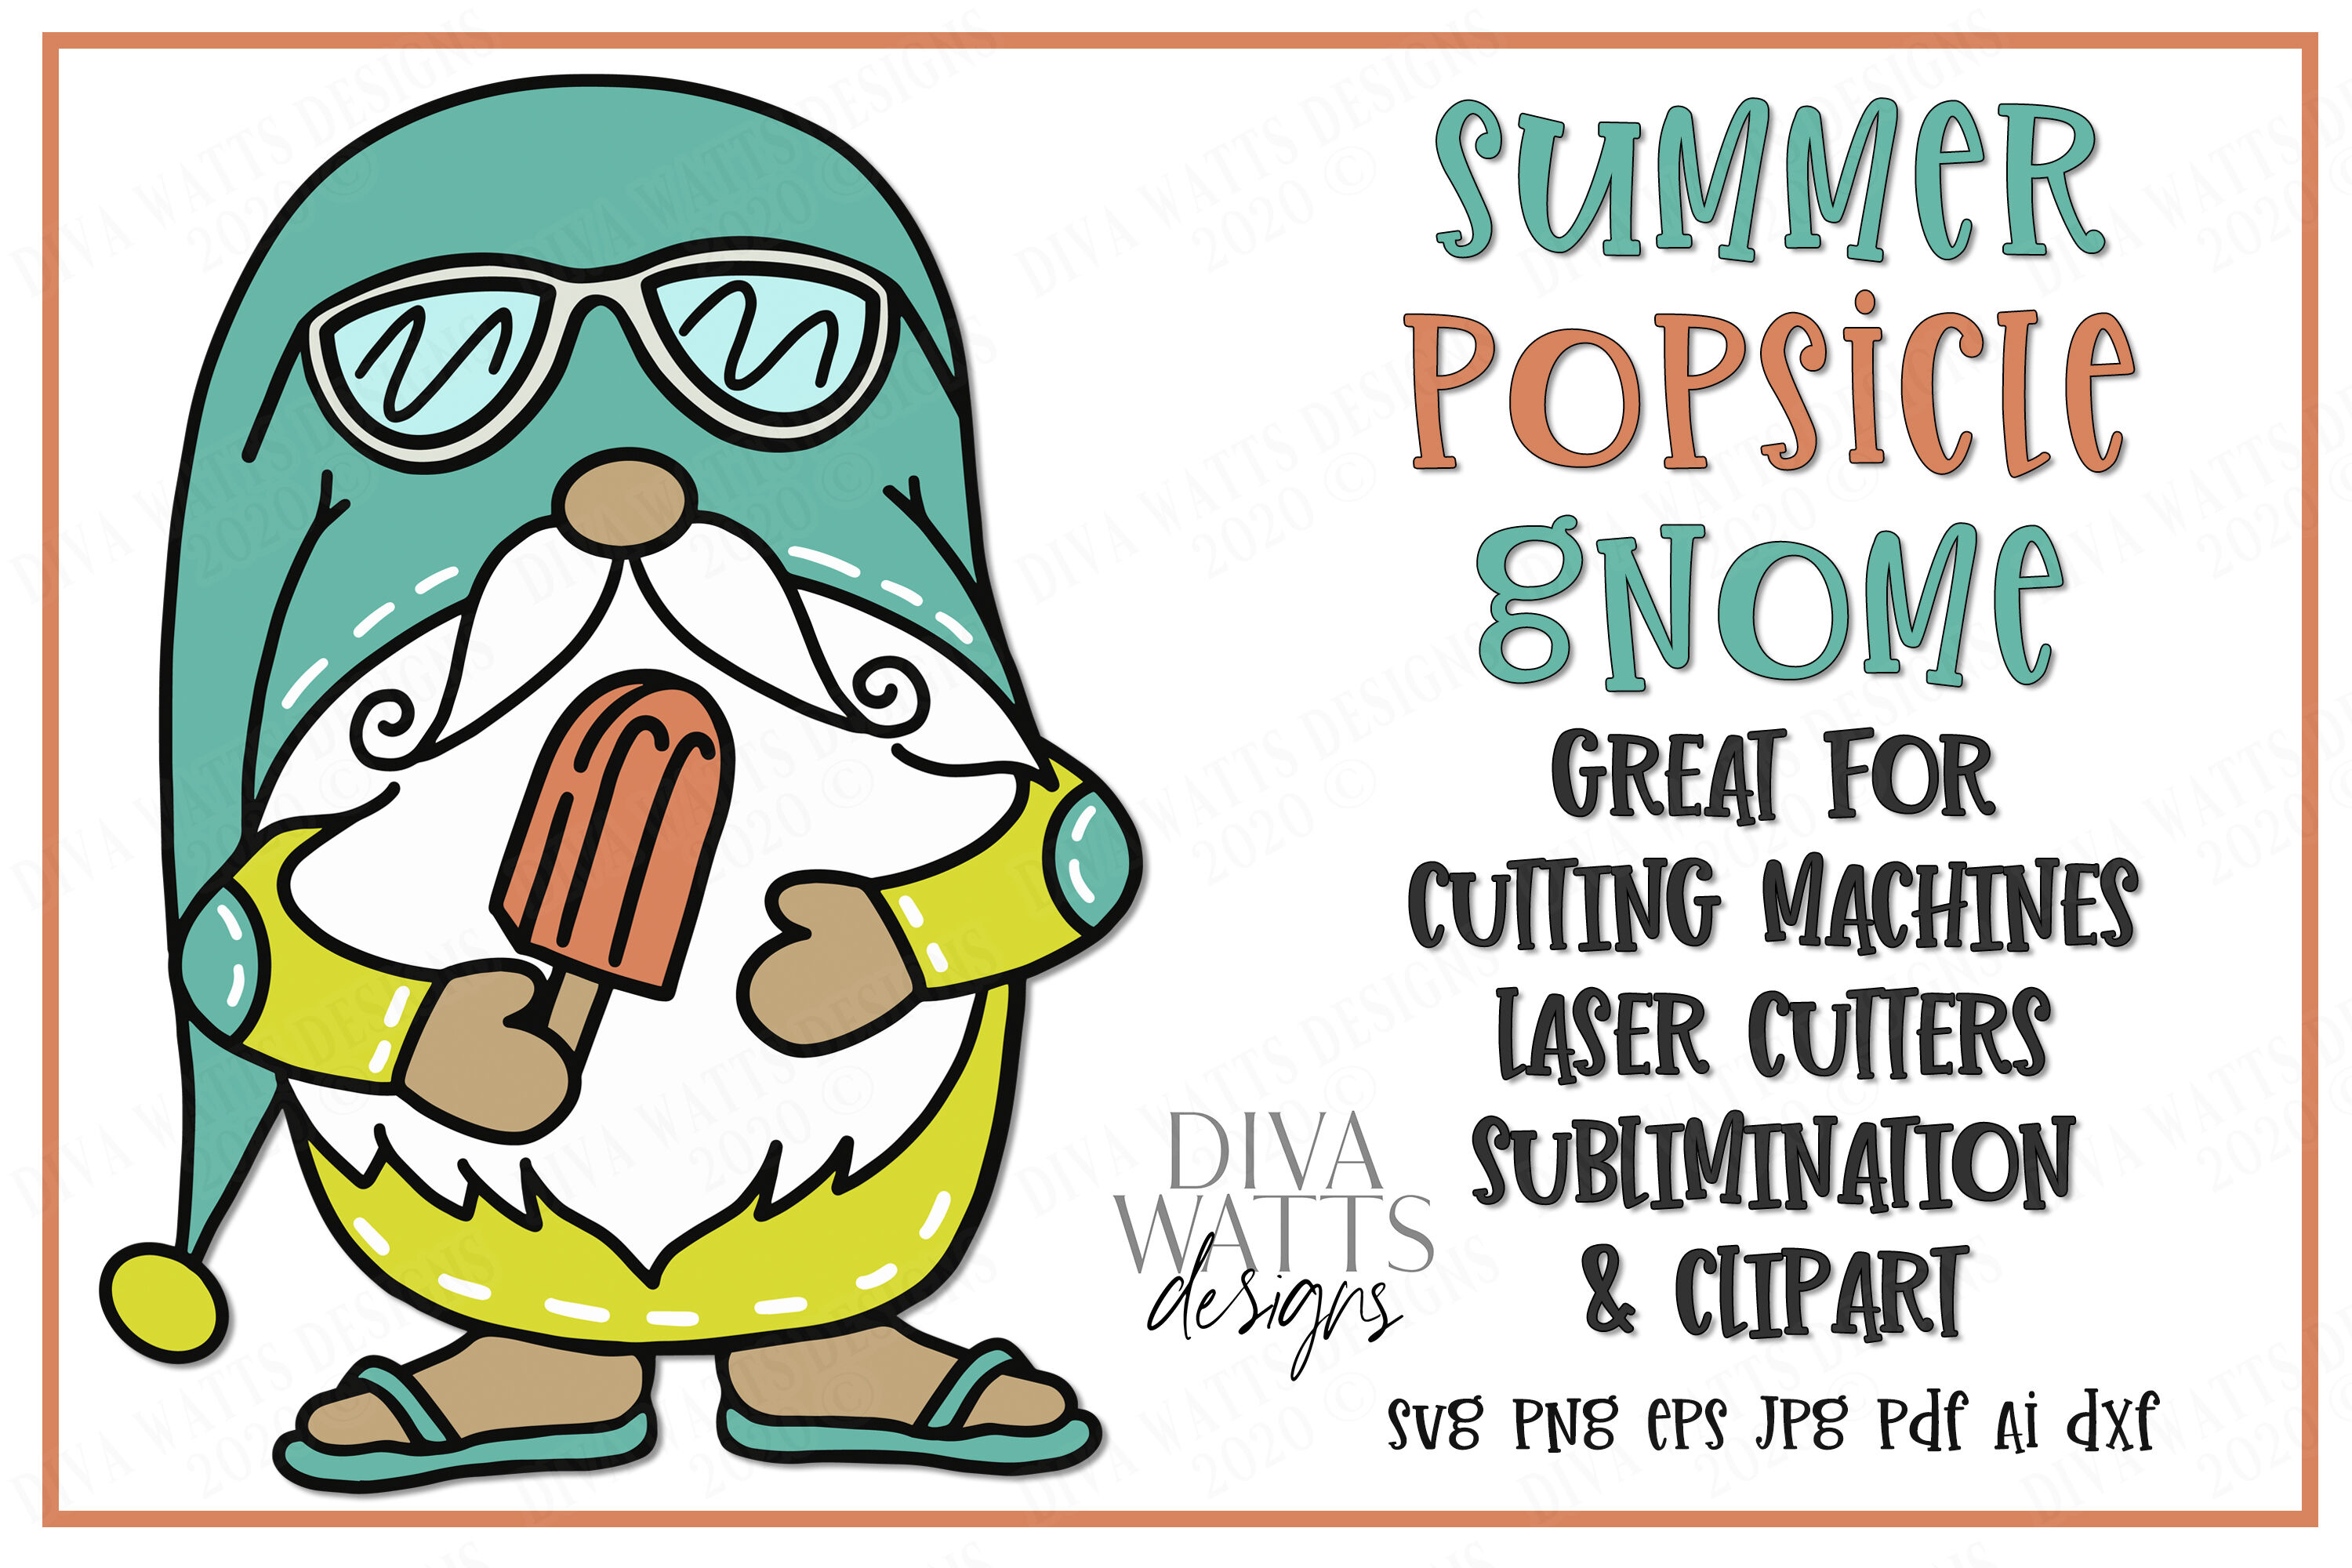 Download Summer Popsicle Gnome Cut File - SVG DXF EPS By Diva Watts Designs | TheHungryJPEG.com